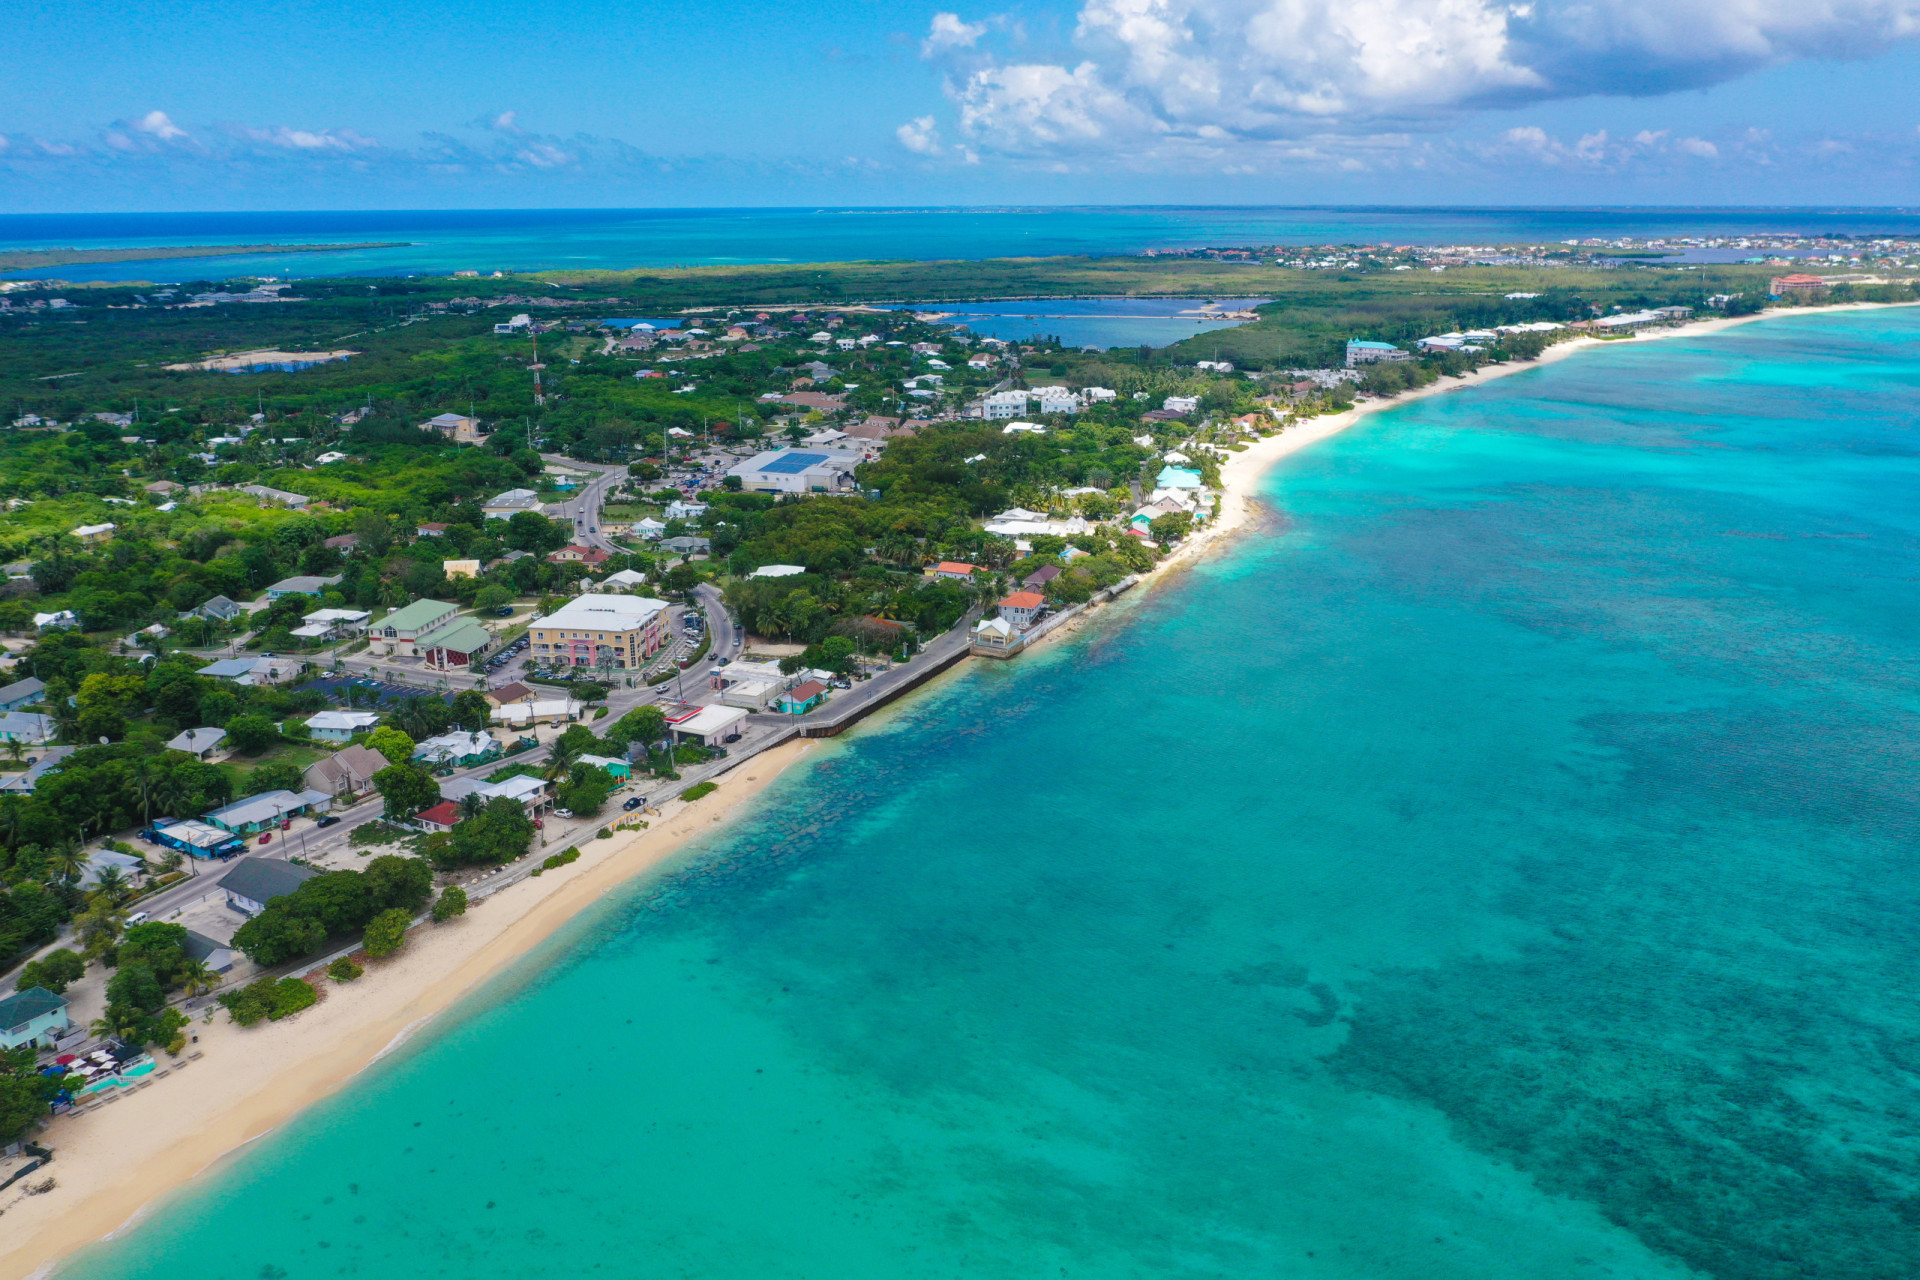 <p>George Town, with a rent index of 76.4, is the epitome of luxury in the Cayman Islands. Its tax-friendly policies make it a magnet for financial institutions.</p><p><a href="https://www.msn.com/en-in/community/channel/vid-7xx8mnucu55yw63we9va2gwr7uihbxwc68fxqp25x6tg4ftibpra?cvid=94631541bc0f4f89bfd59158d696ad7e">Follow us and access great exclusive content every day</a></p>